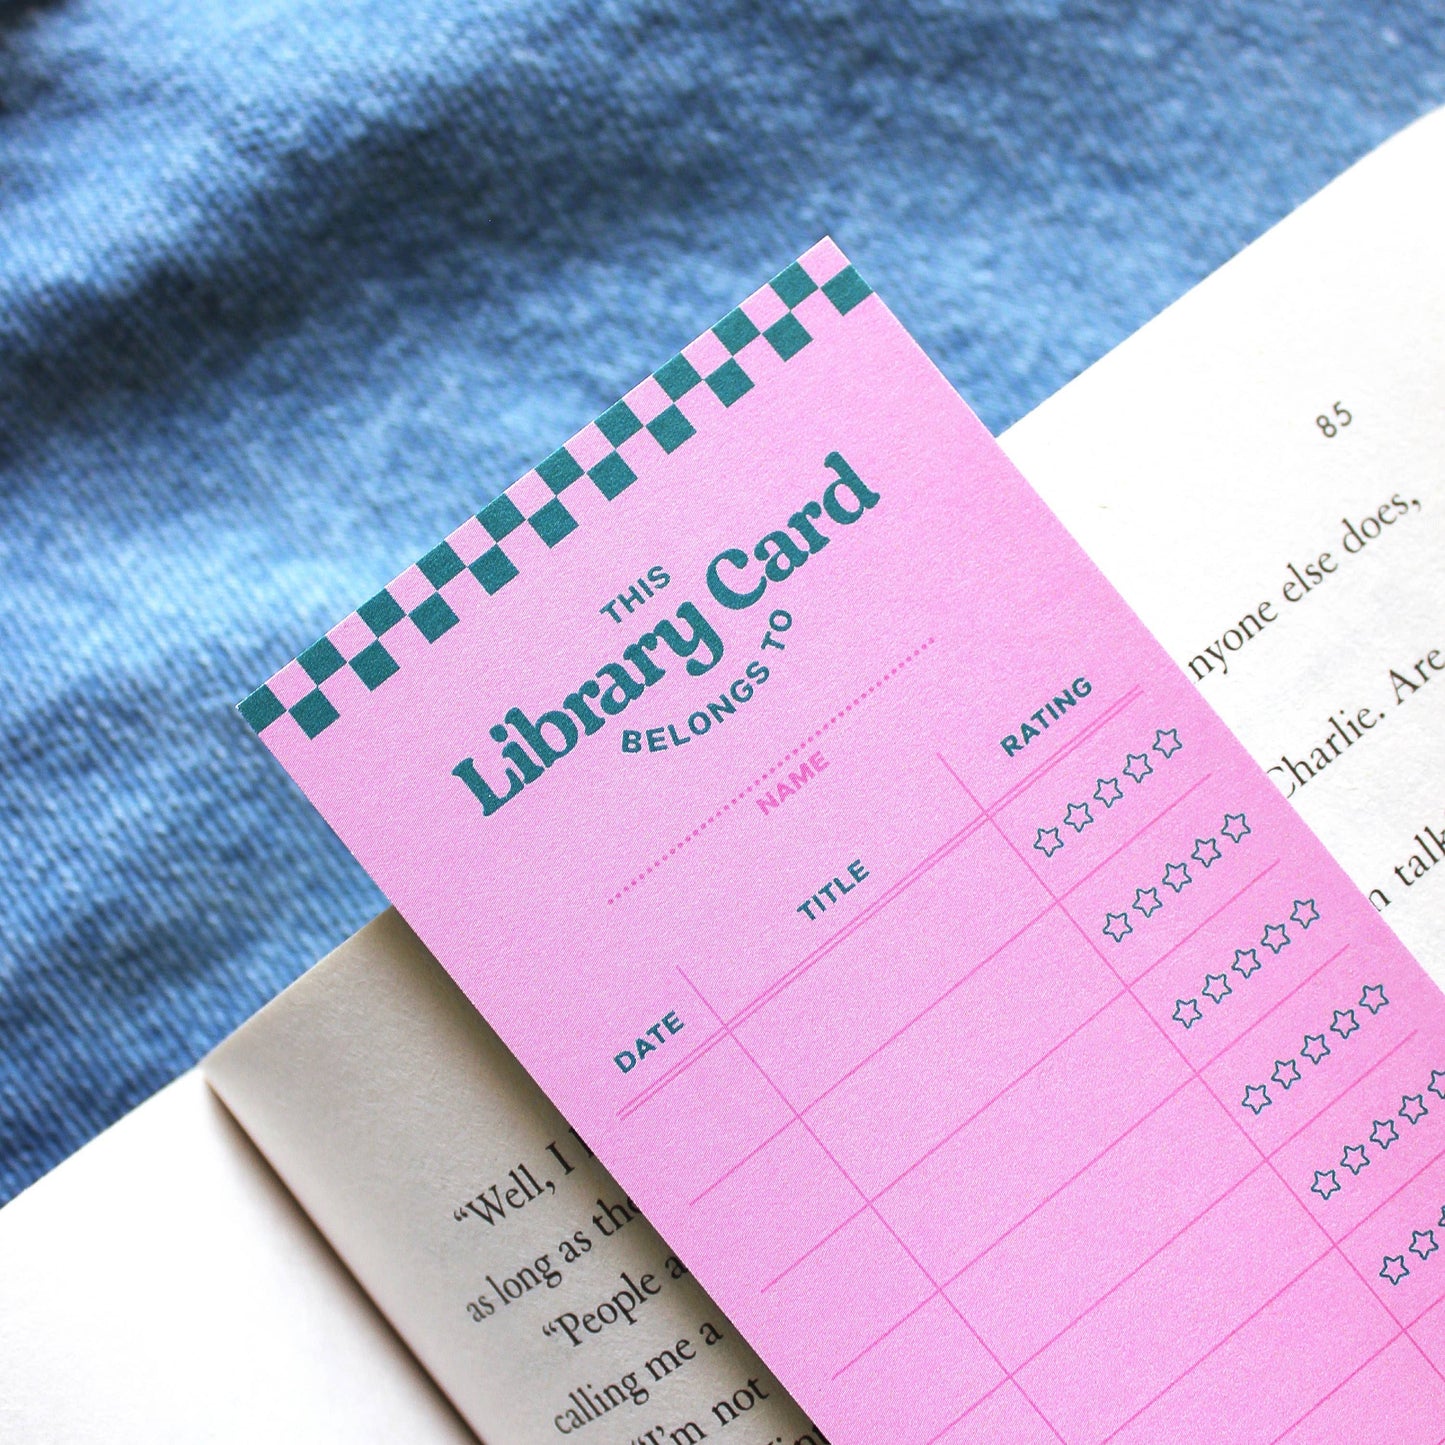 Personal Library Card Book Tracker Bookmark